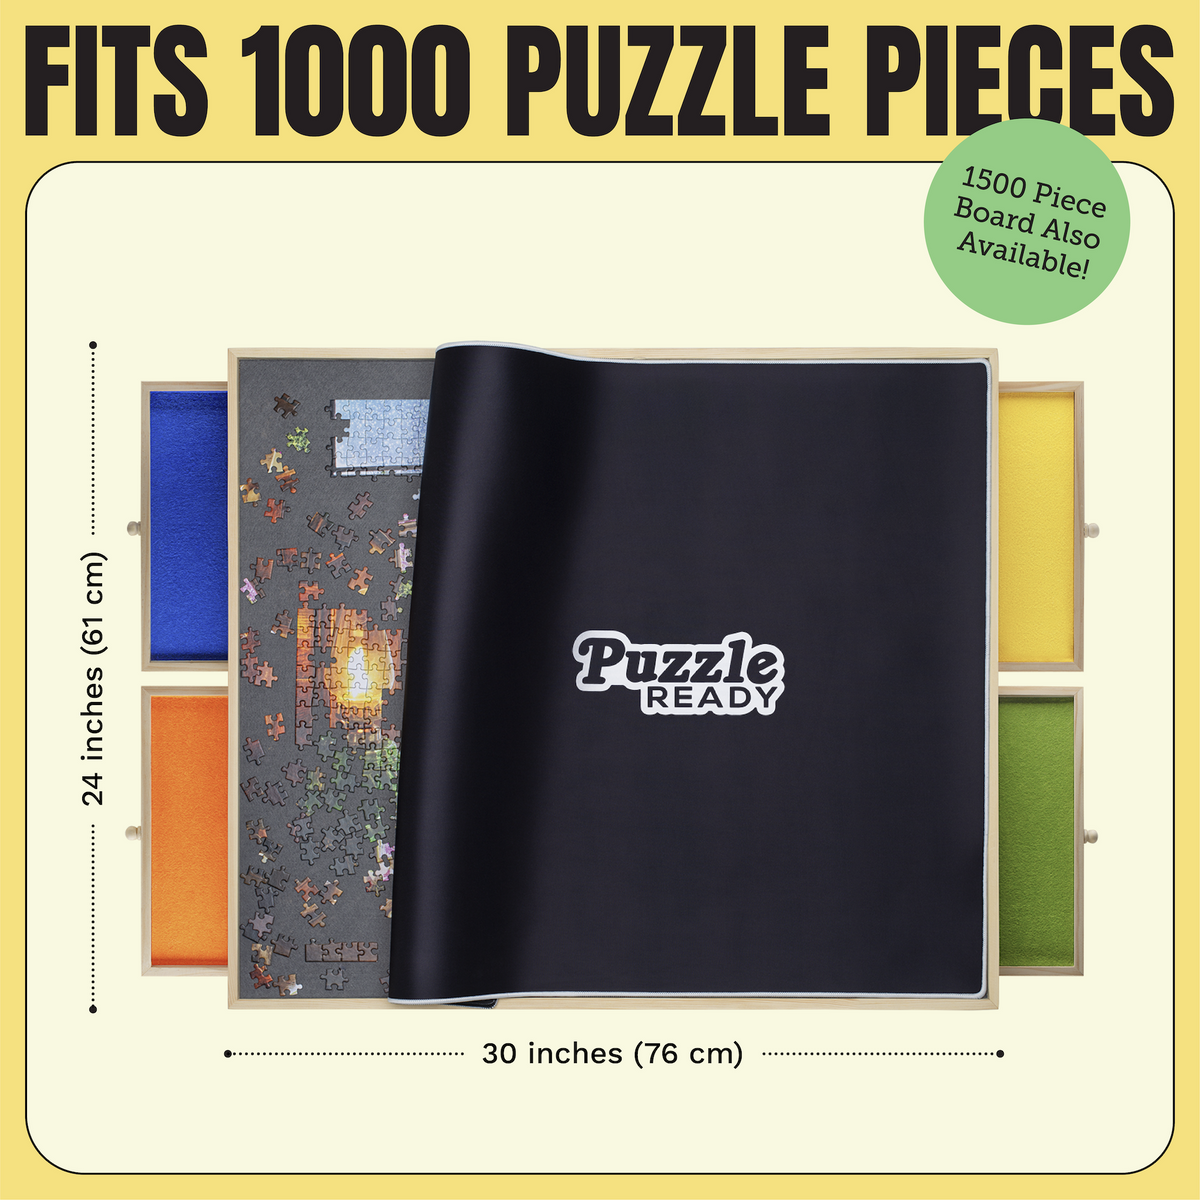 1000 Piece Wooden Jigsaw Puzzle Board - 4 Drawers, Rotating Puzzle